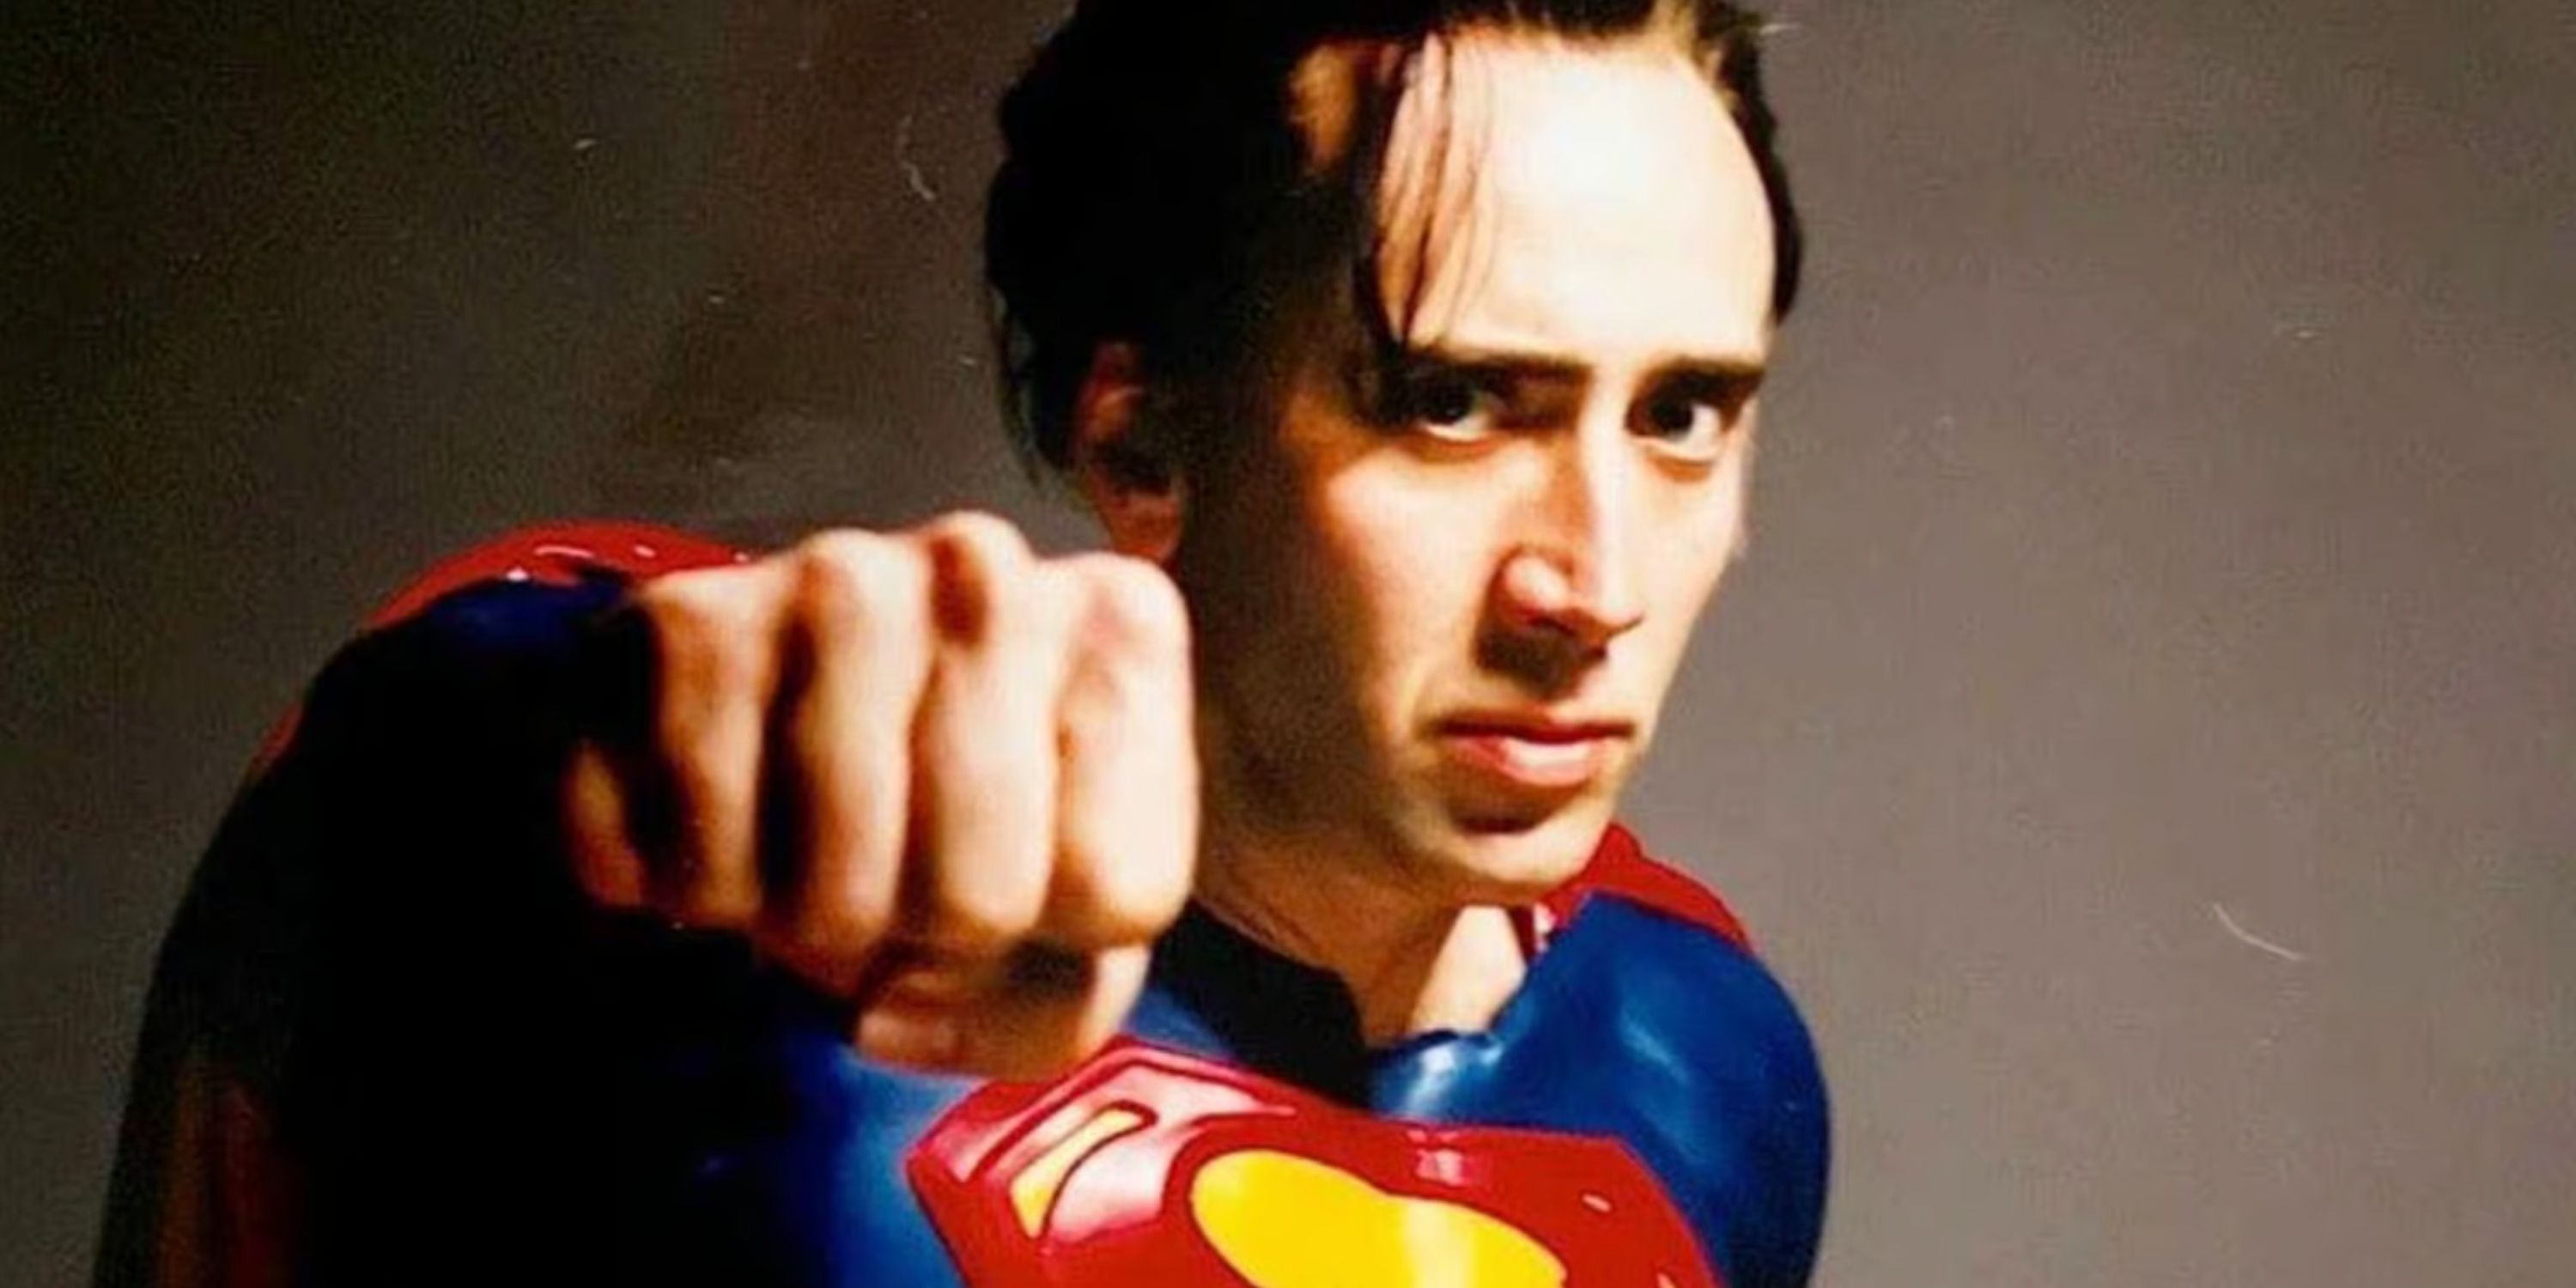 nicolas cage as superman throwing a punch 